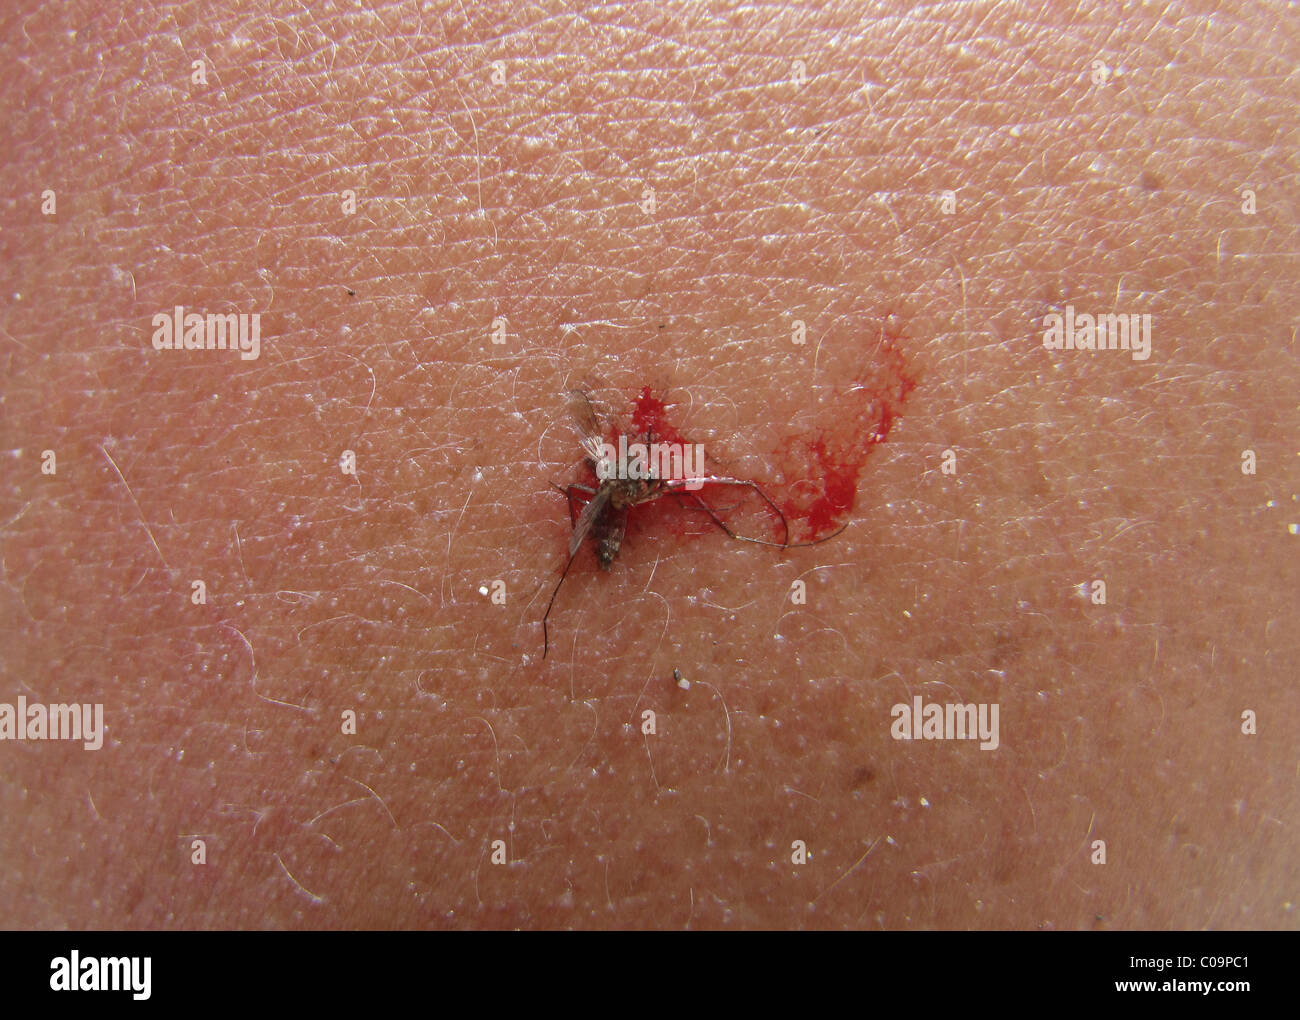 Dead mosquito (Culicidae) squashed on human skin Stock Photo